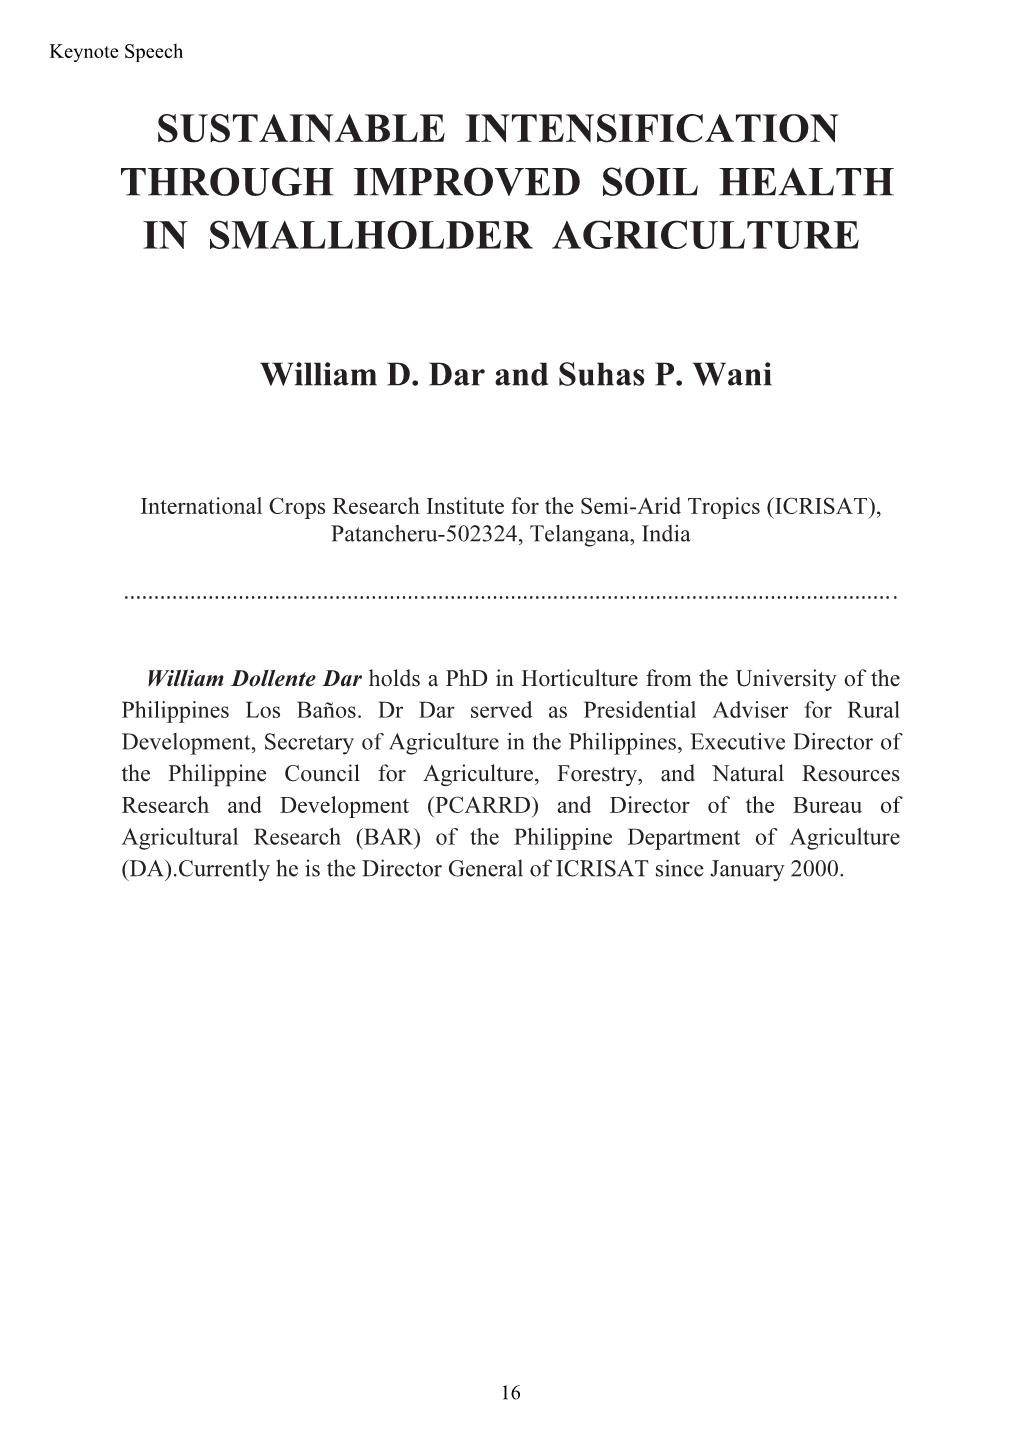 Sustainable Intensification Through Improved Soil Health in Smallholder Agriculture